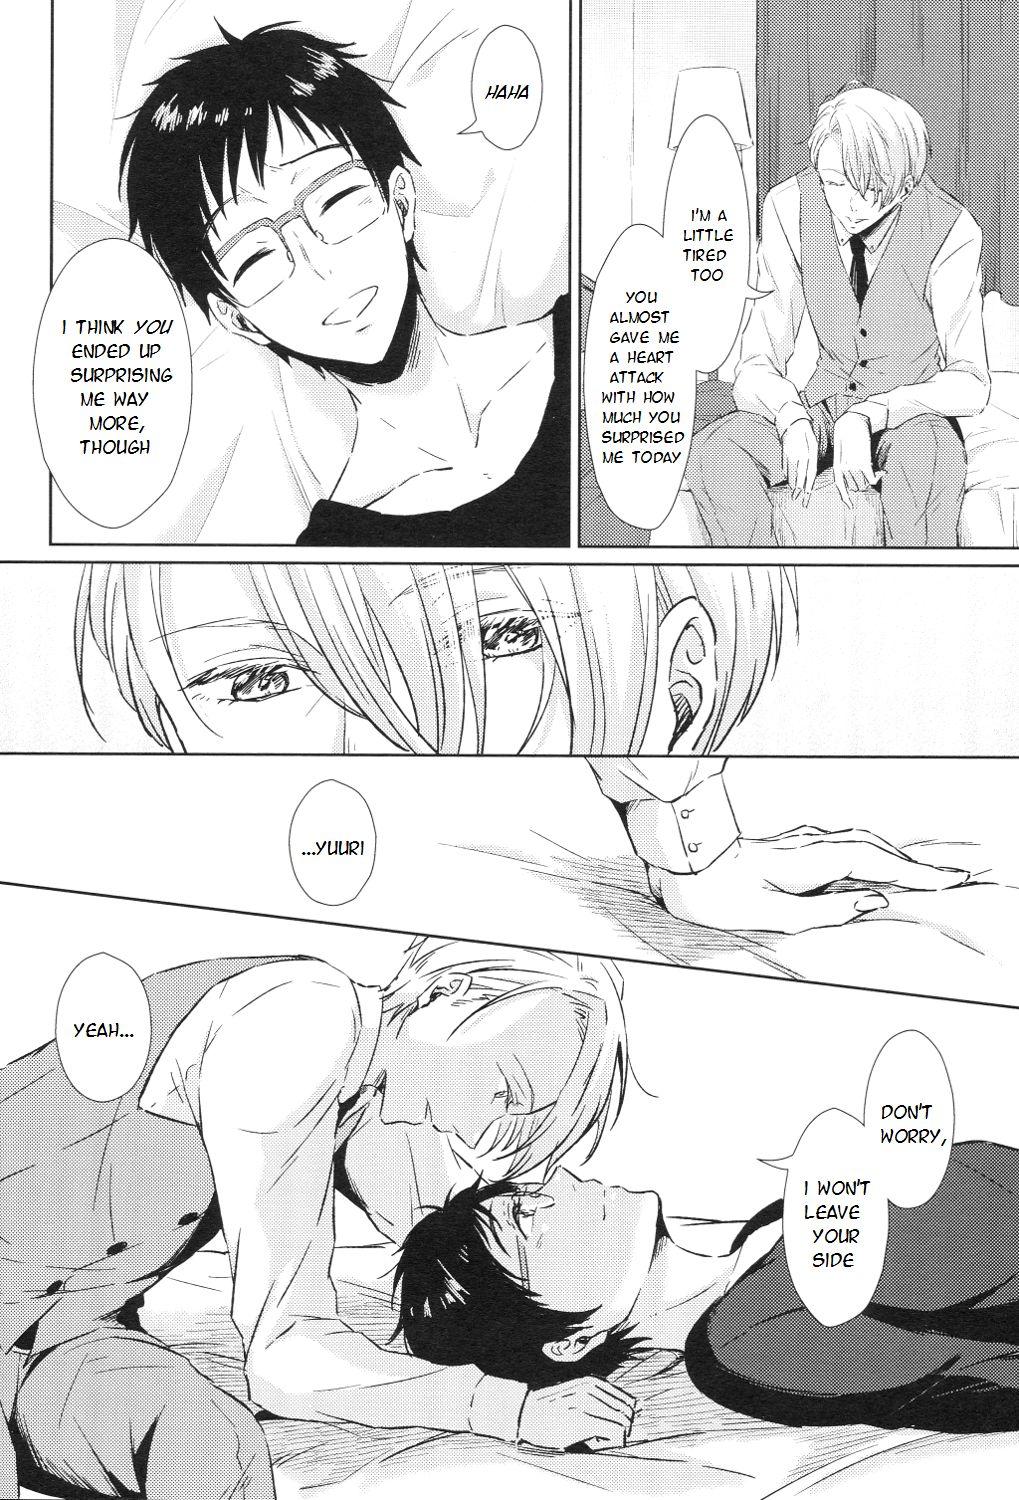 Girl Sucking Dick Ai o Tabanete Tsutaetai | I want to convey my love for you - Yuri on ice Real Amatuer Porn - Page 4